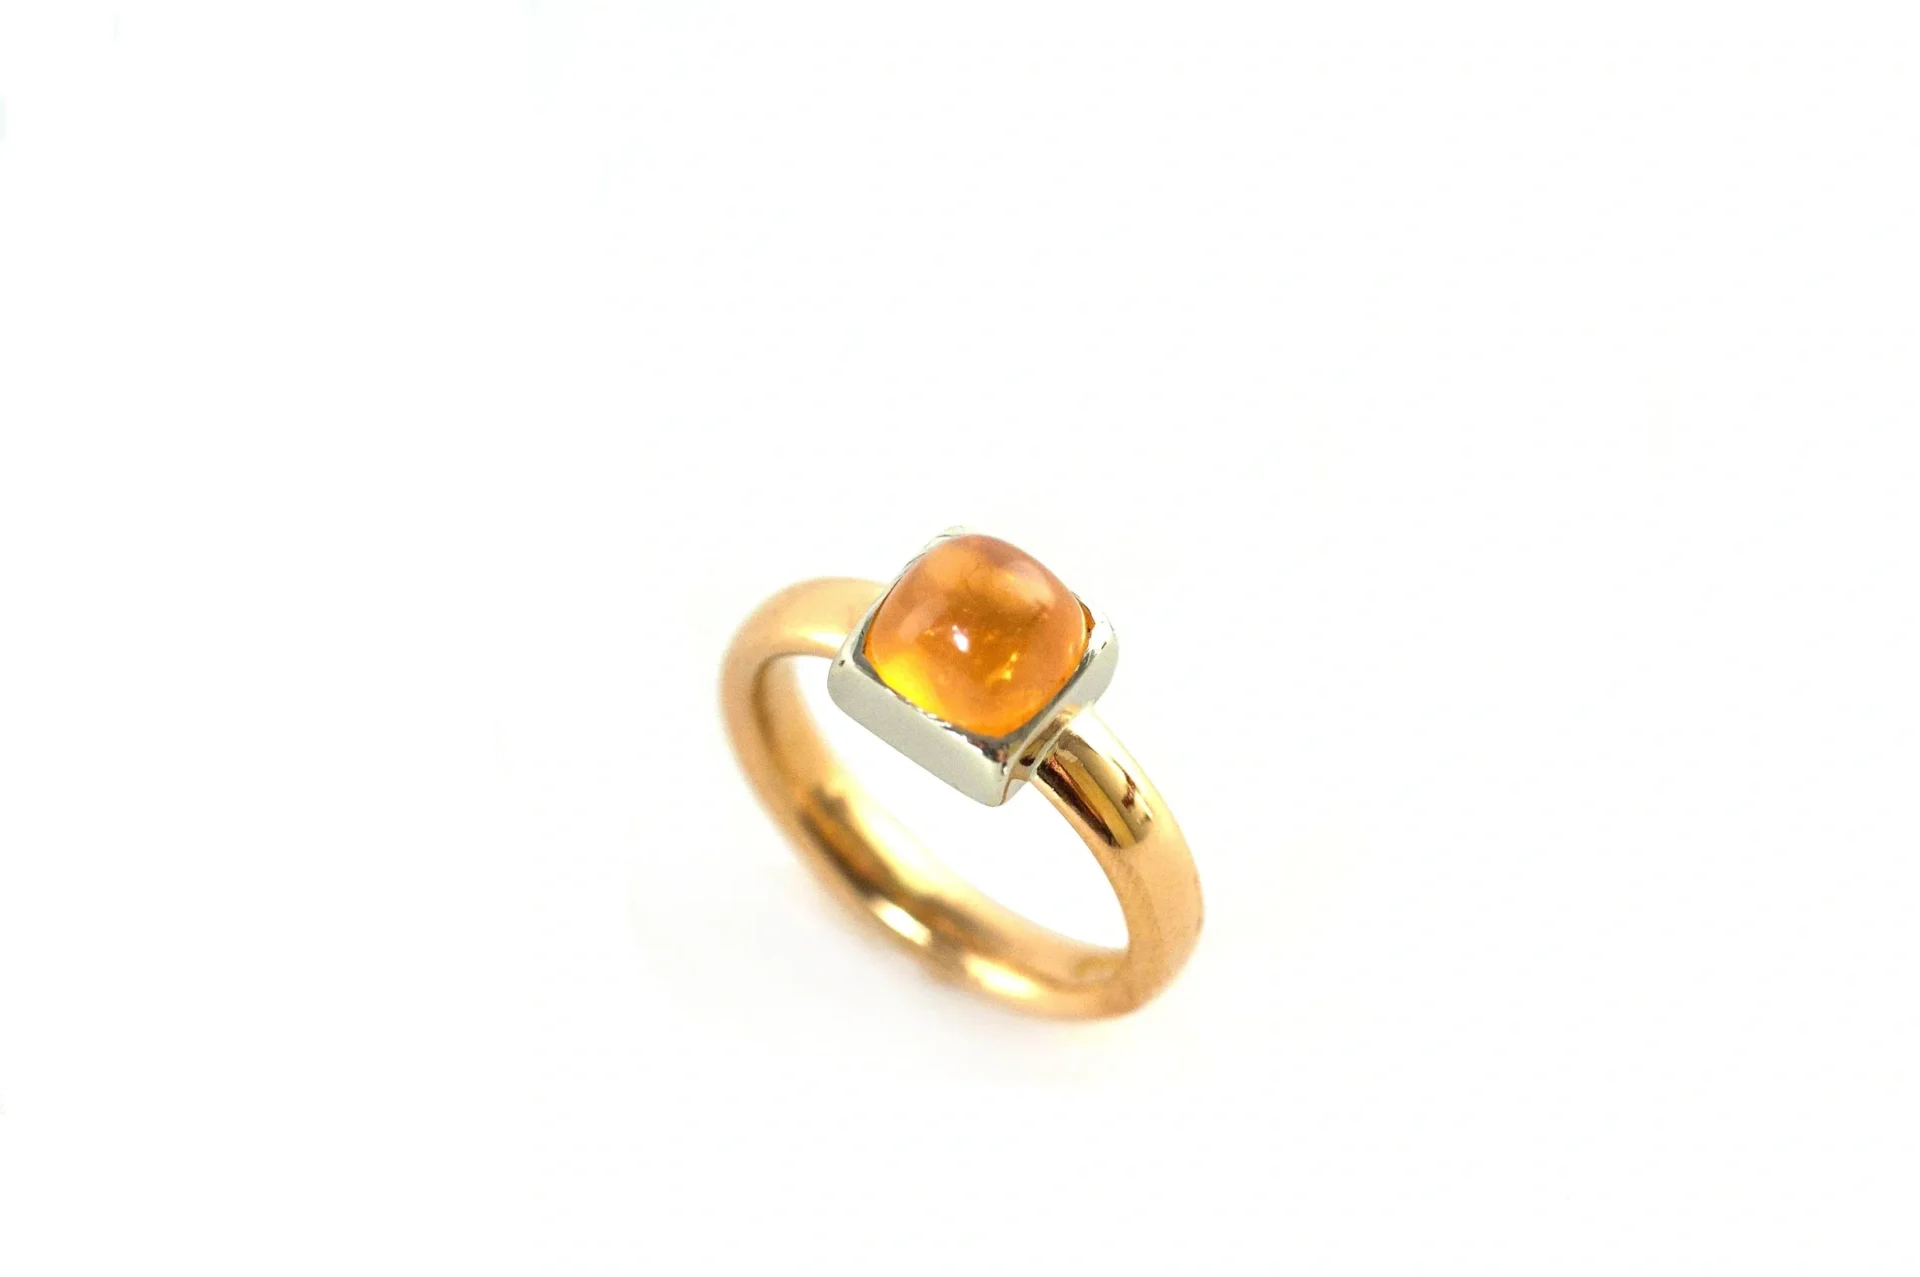 A gold ring with an orange stone on top of it.